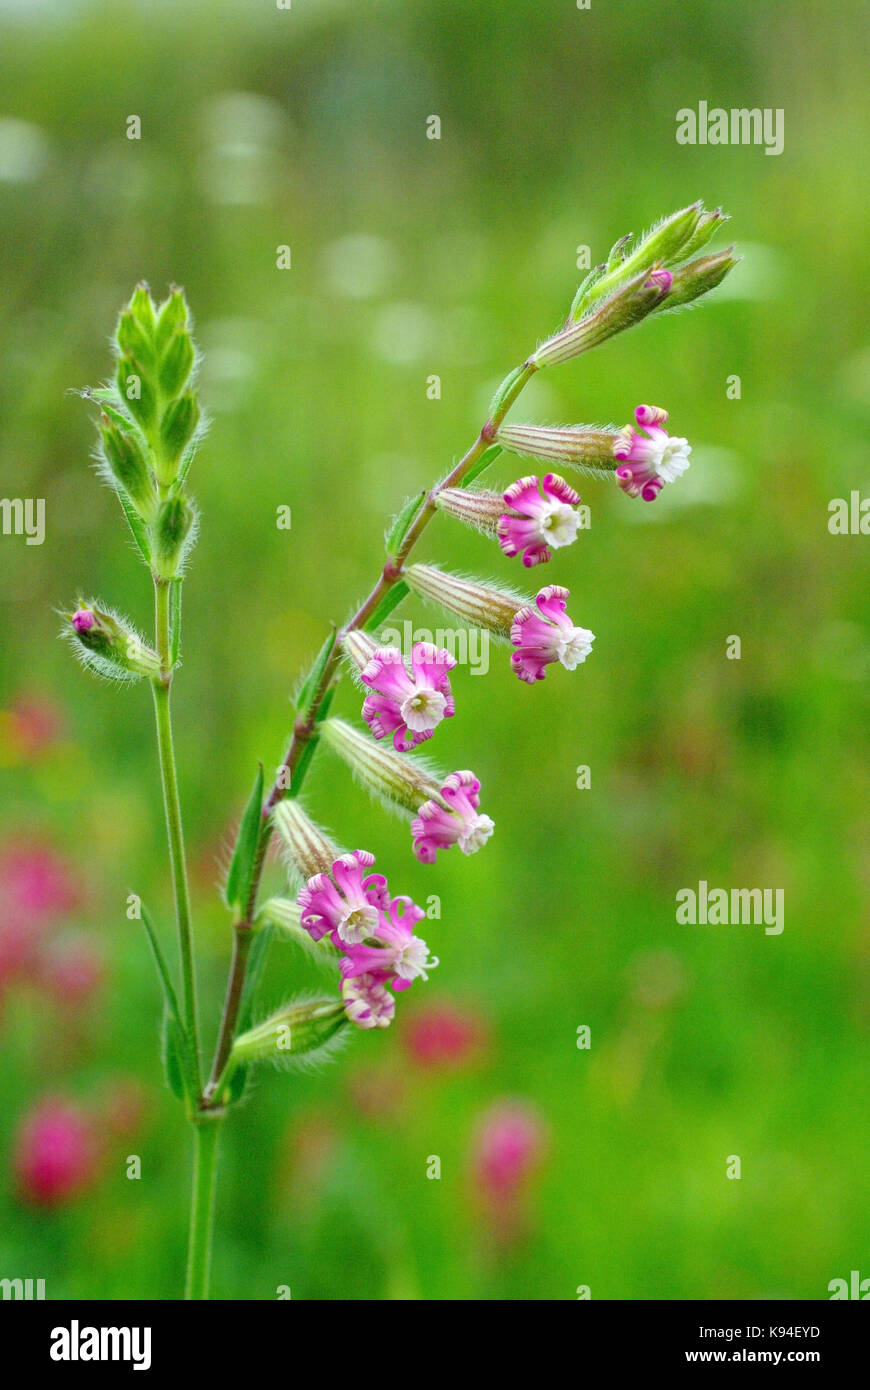 the wildflower Silene bellidifolia, the Daisy-leaved catchfly or Dense-flowered Catchfly, from the family Caryophyllaceae Stock Photo